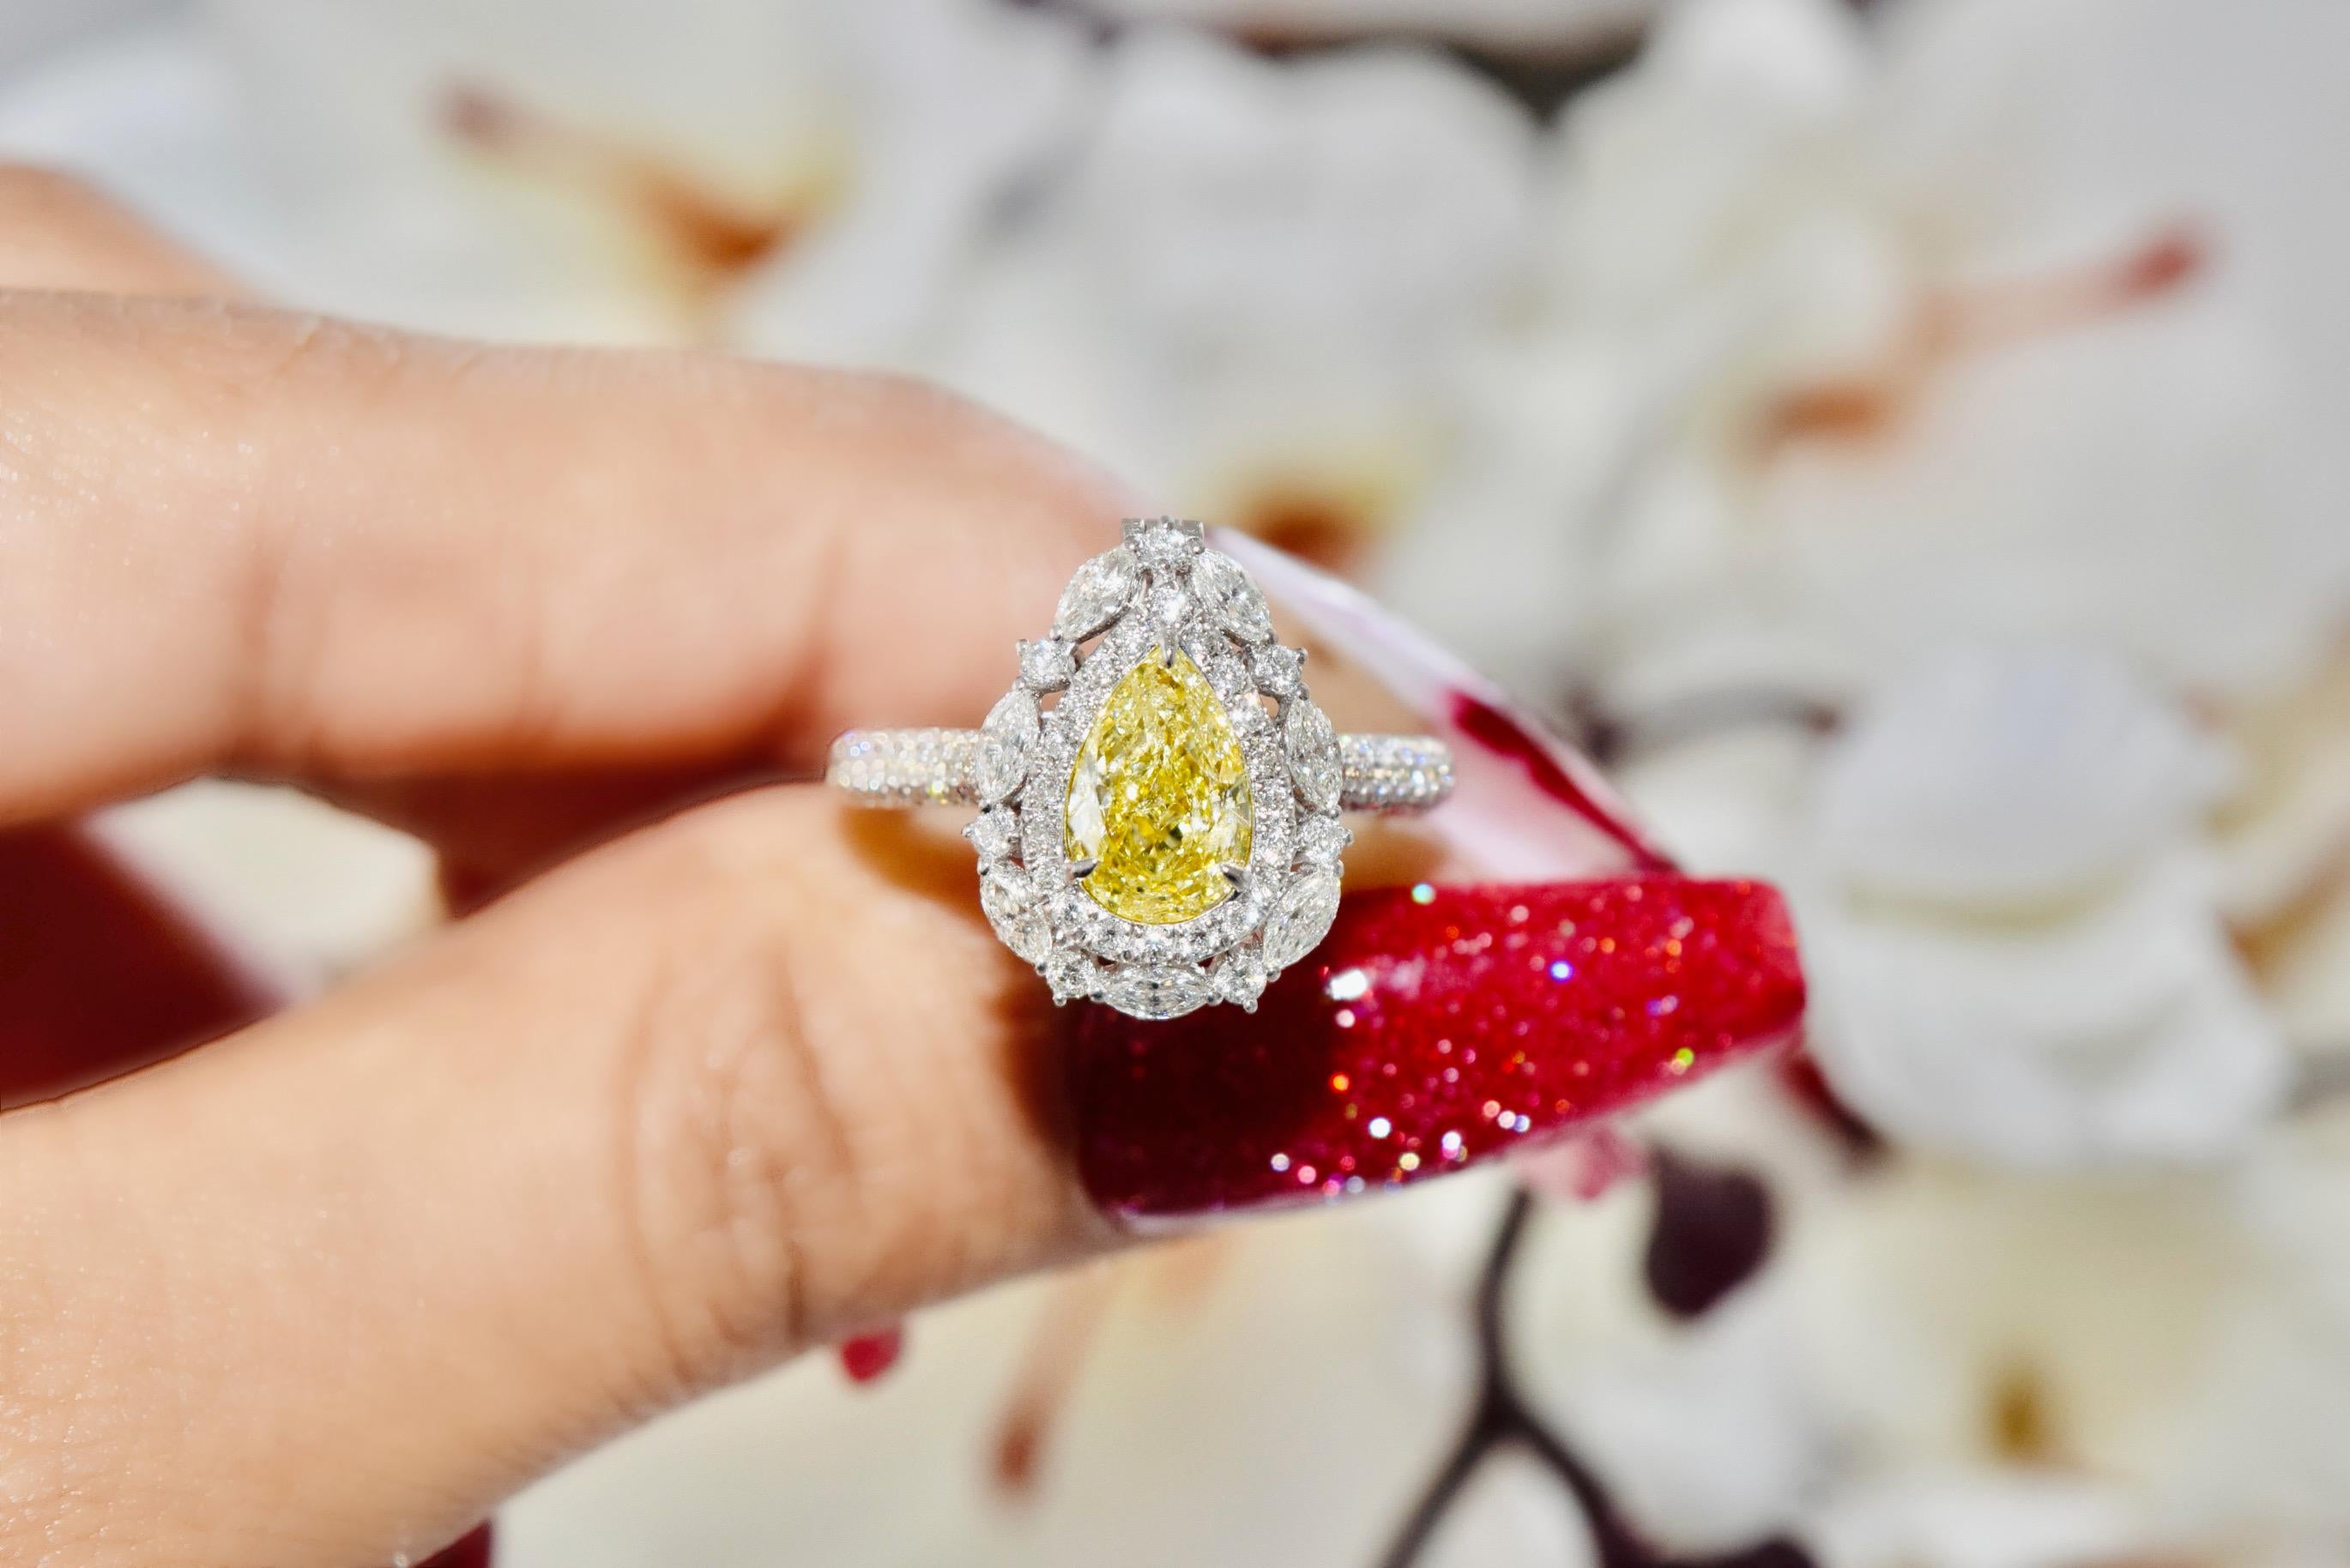 **100% NATURAL FANCY COLOUR DIAMOND JEWELLERIES**

✪ Jewelry Details ✪

♦ MAIN STONE DETAILS

➛ Stone Shape: Pear
➛ Stone Color: W-X range
➛ Stone Weight: 1.00 carats
➛ Clarity: I2
➛ GIA certified

♦ SIDE STONE DETAILS

➛ Side Marquise  diamond -07